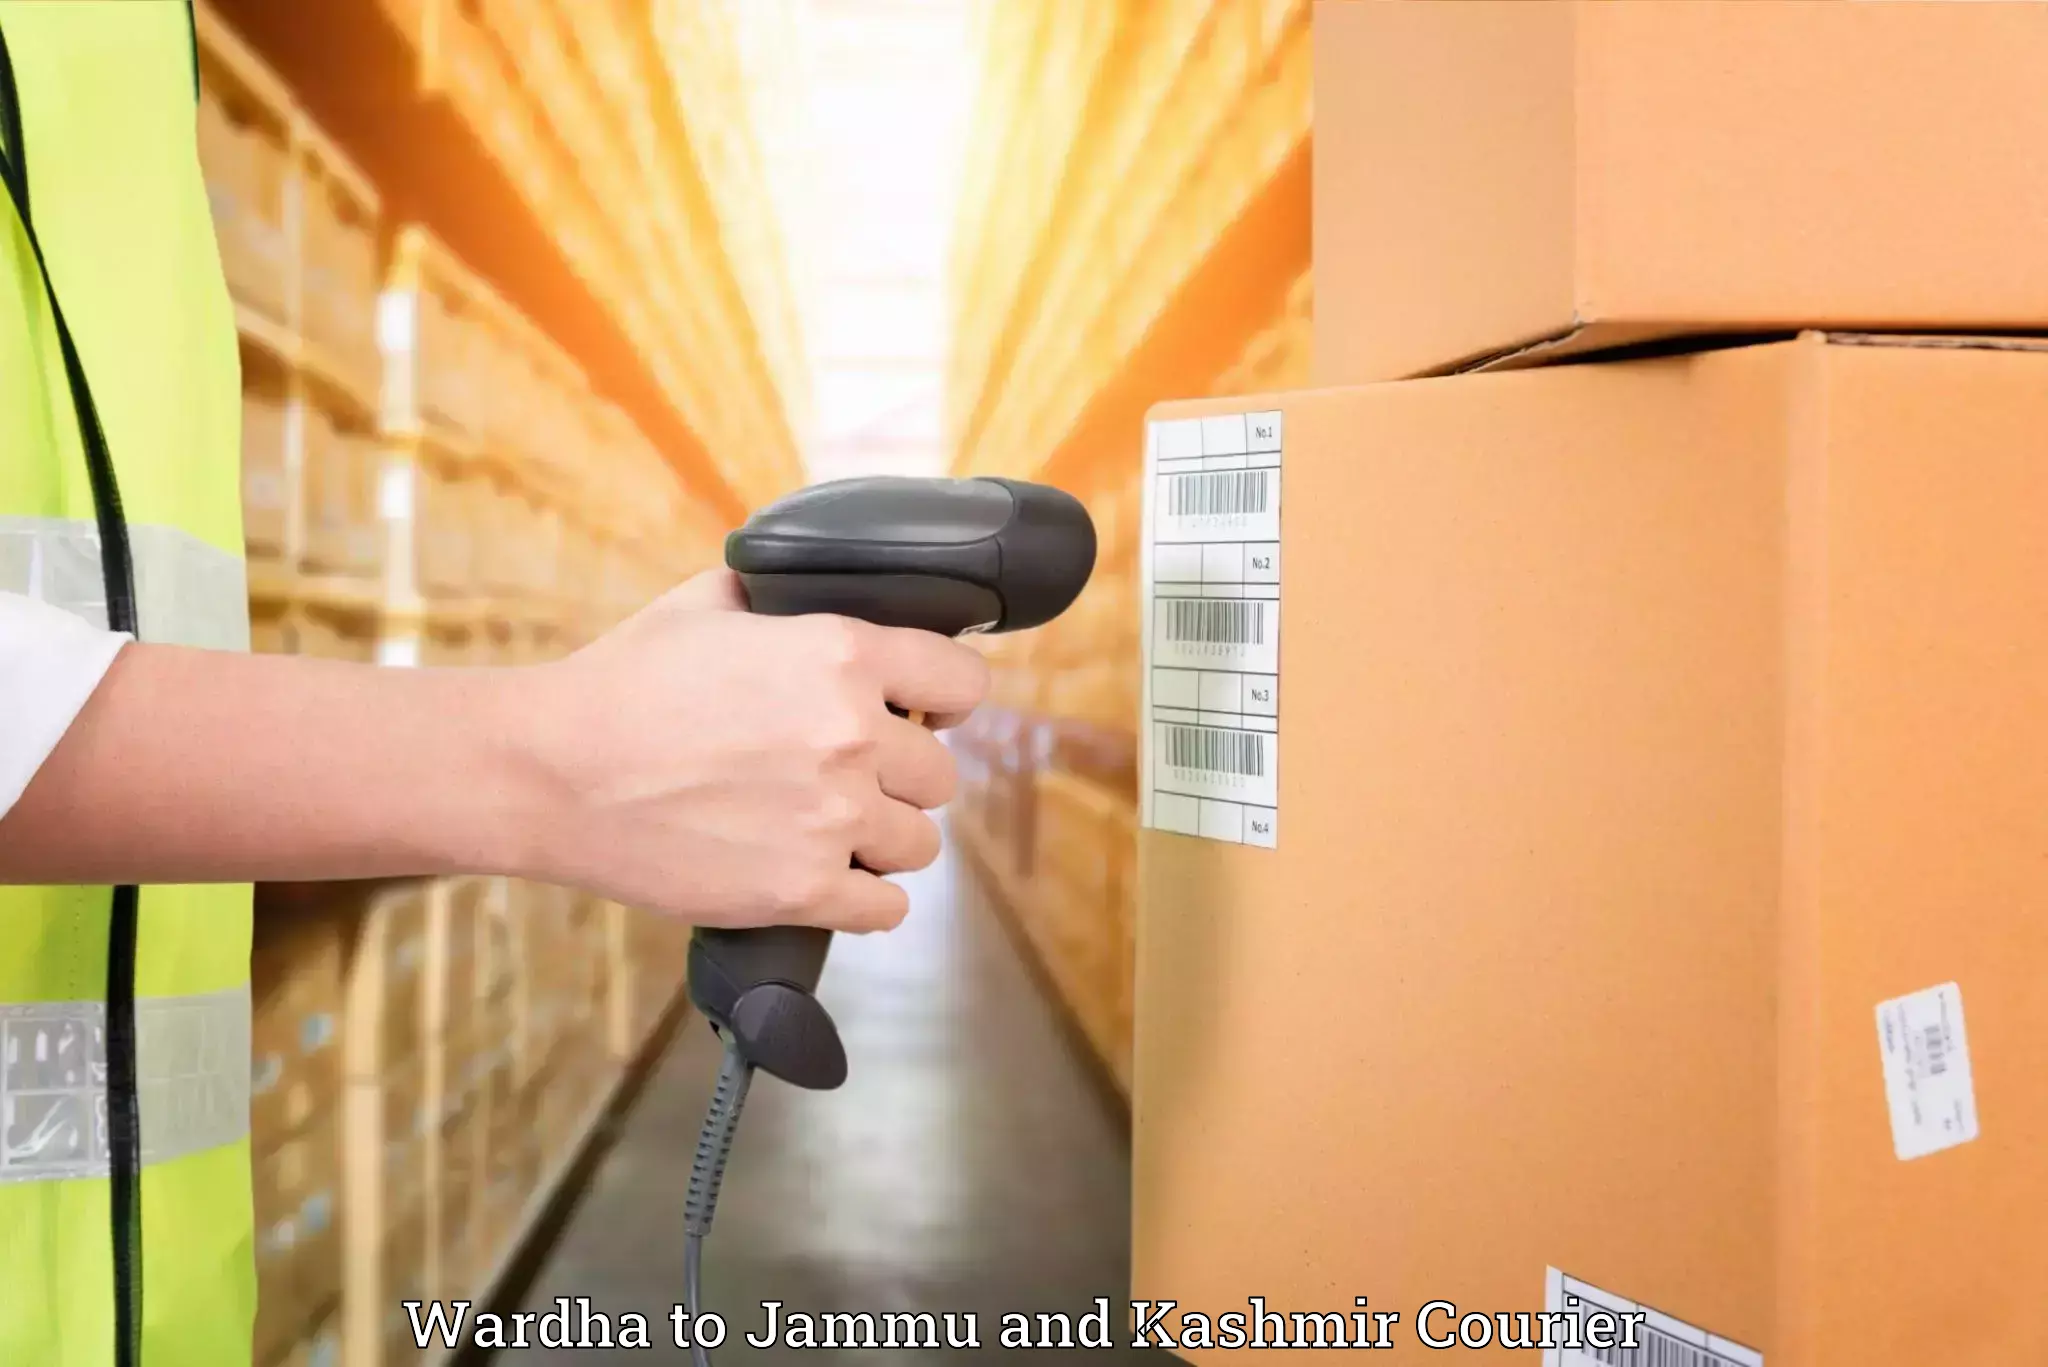 Trusted relocation experts Wardha to Jammu and Kashmir